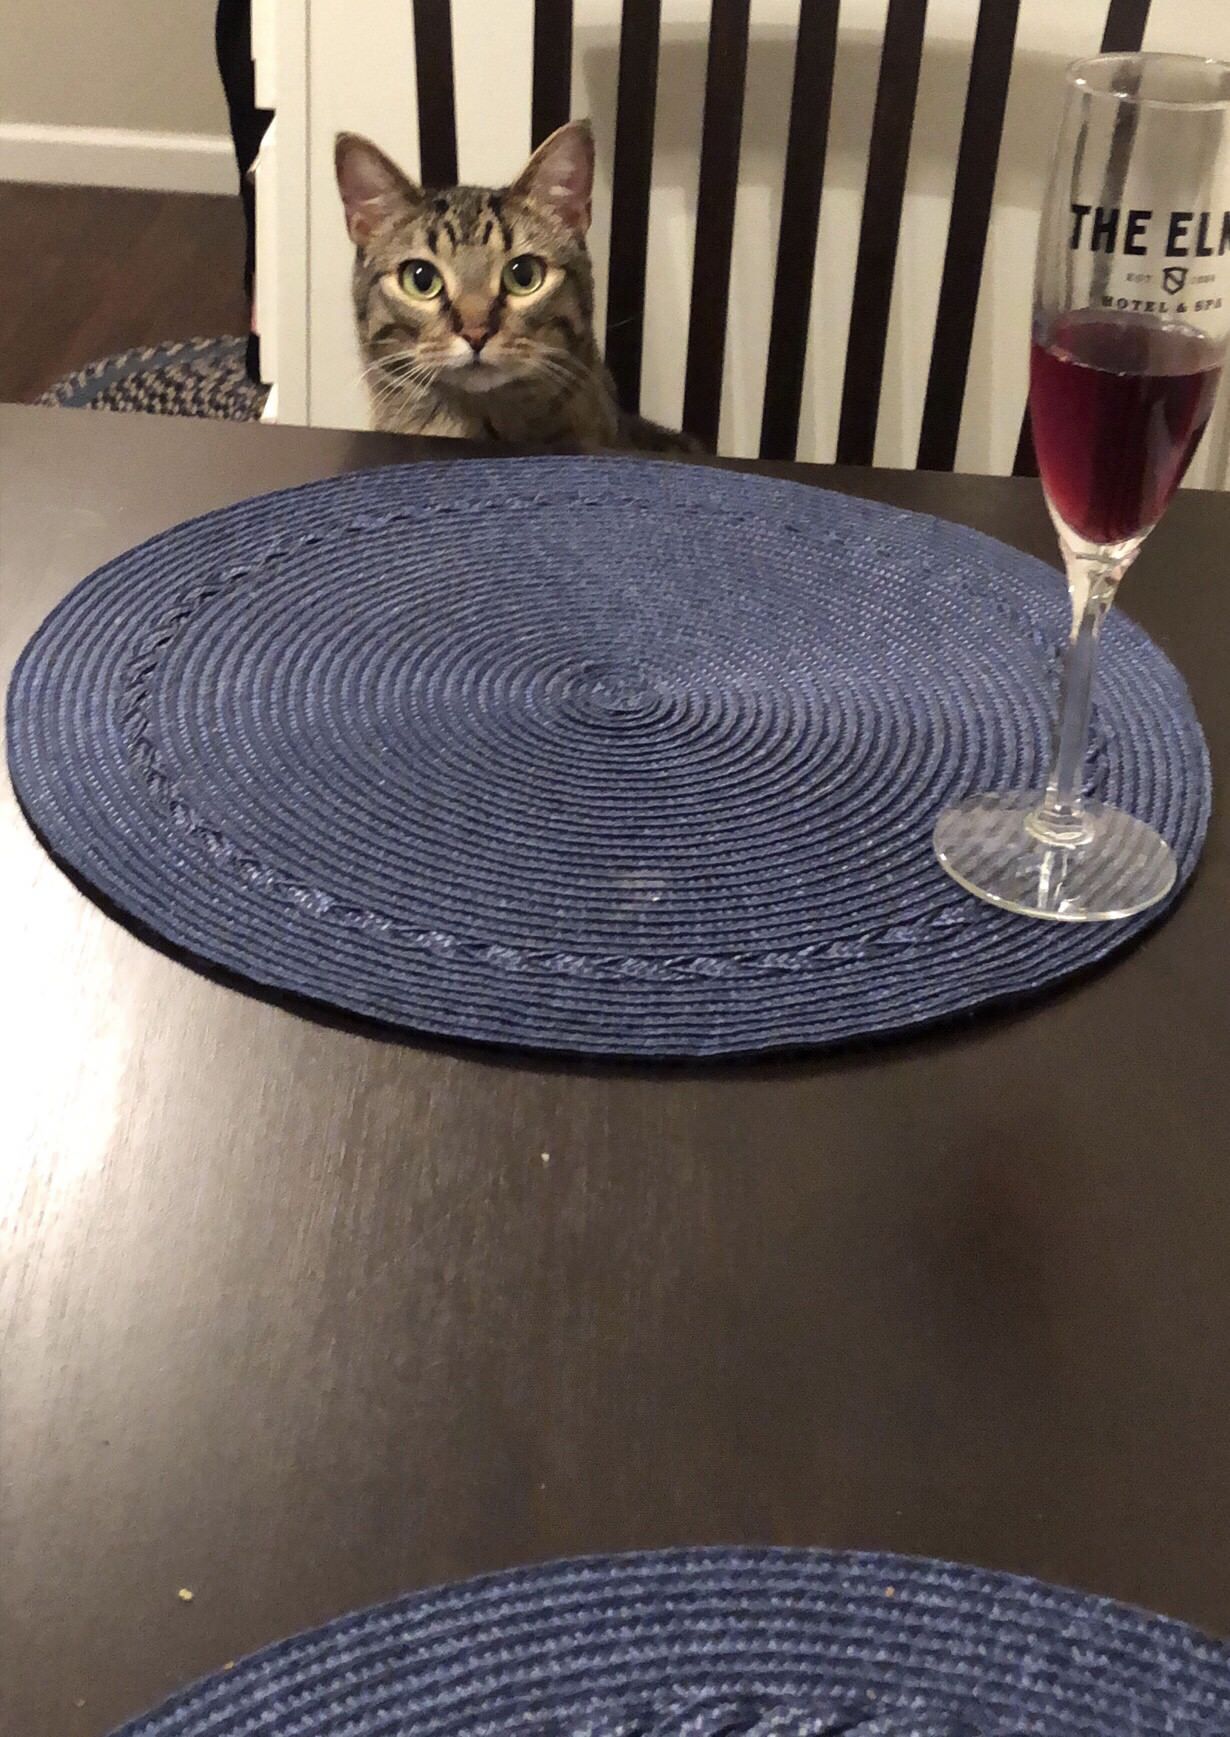 I made my wife mad so my kitty Milo was my date.